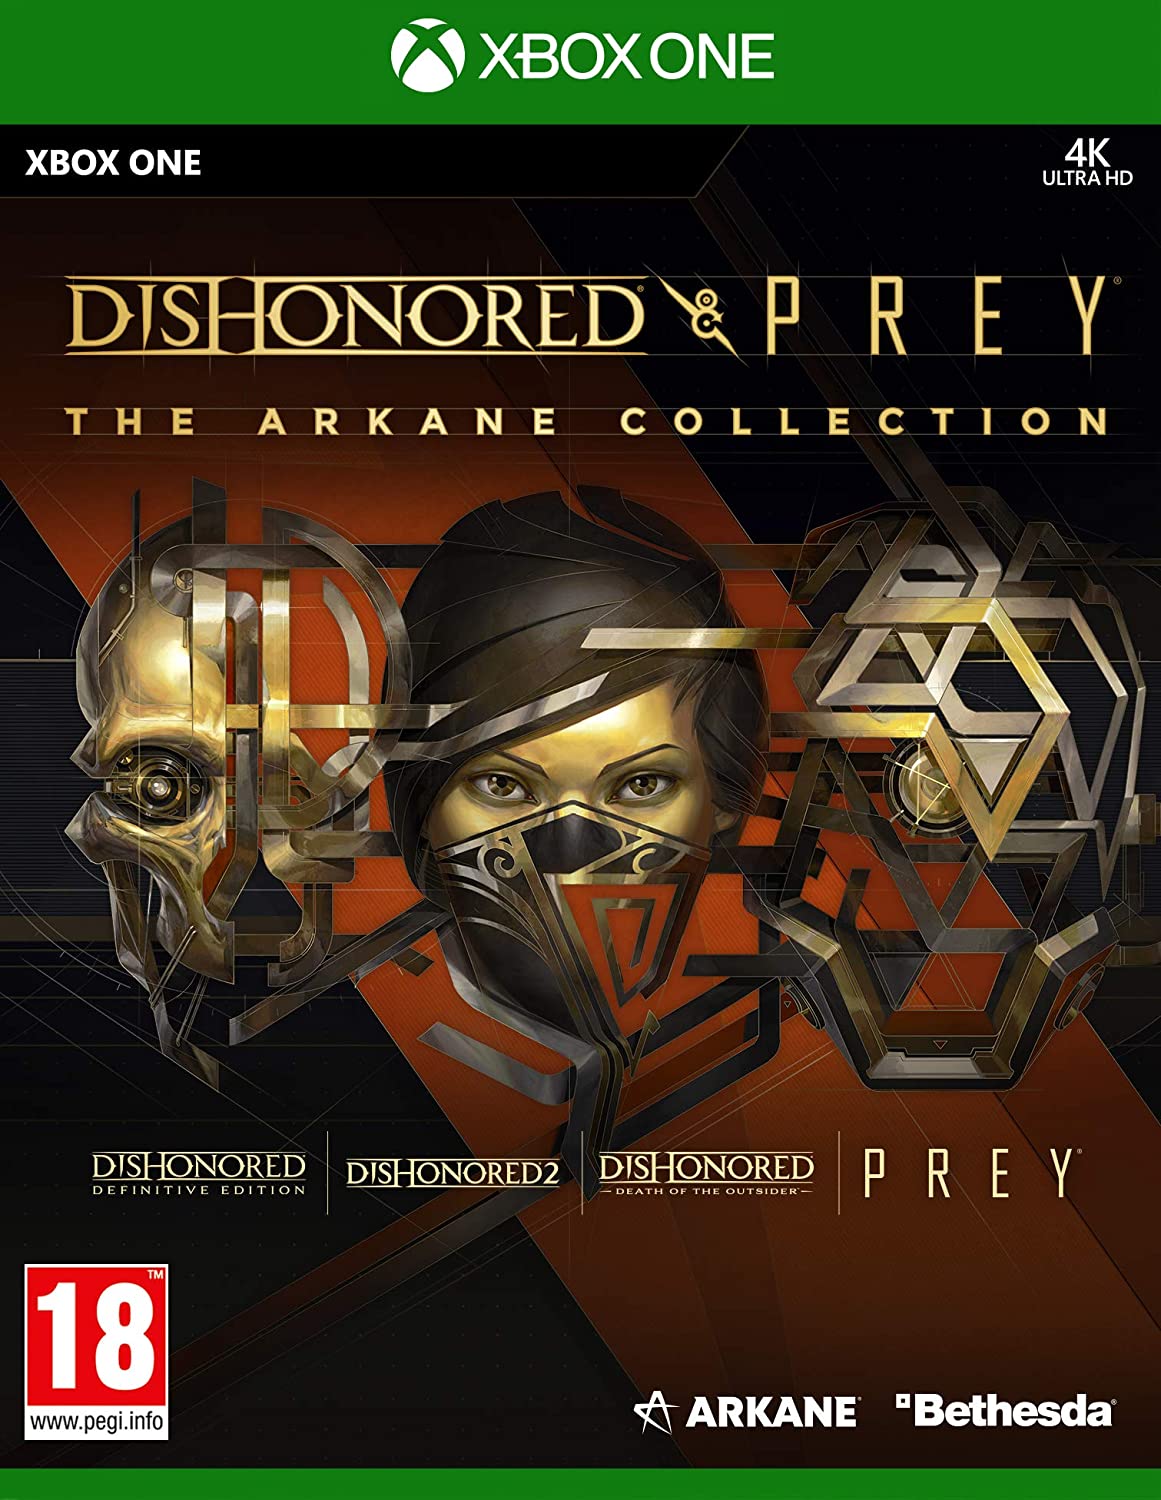 The Arkane Collection Dishonored and Prey